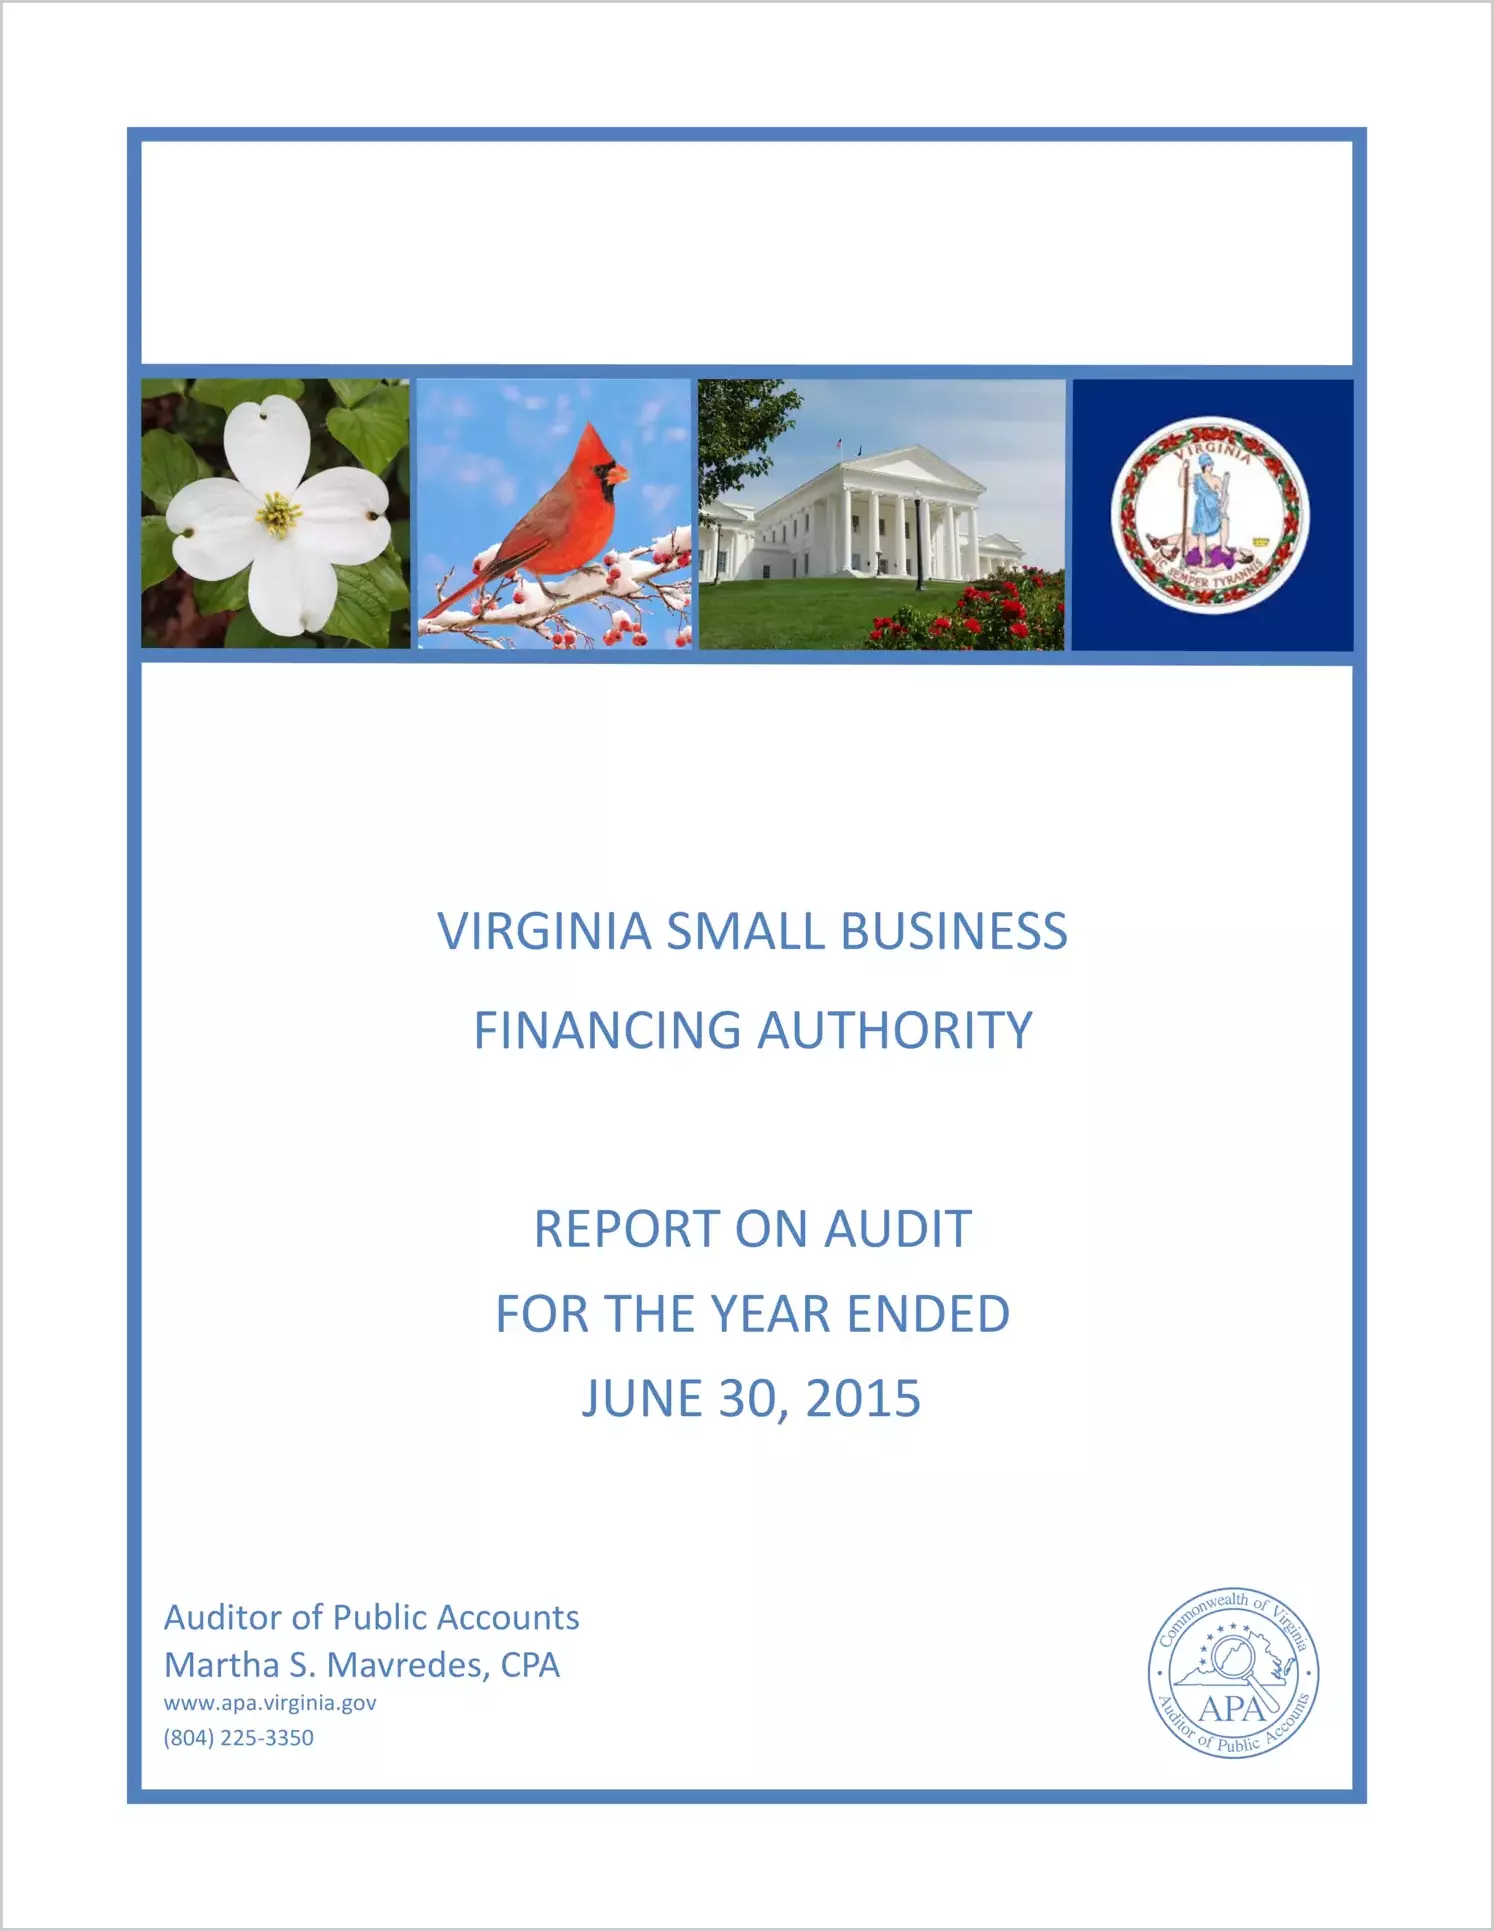 Virginia Small Business Financing Authority for the year ended June 30, 2015